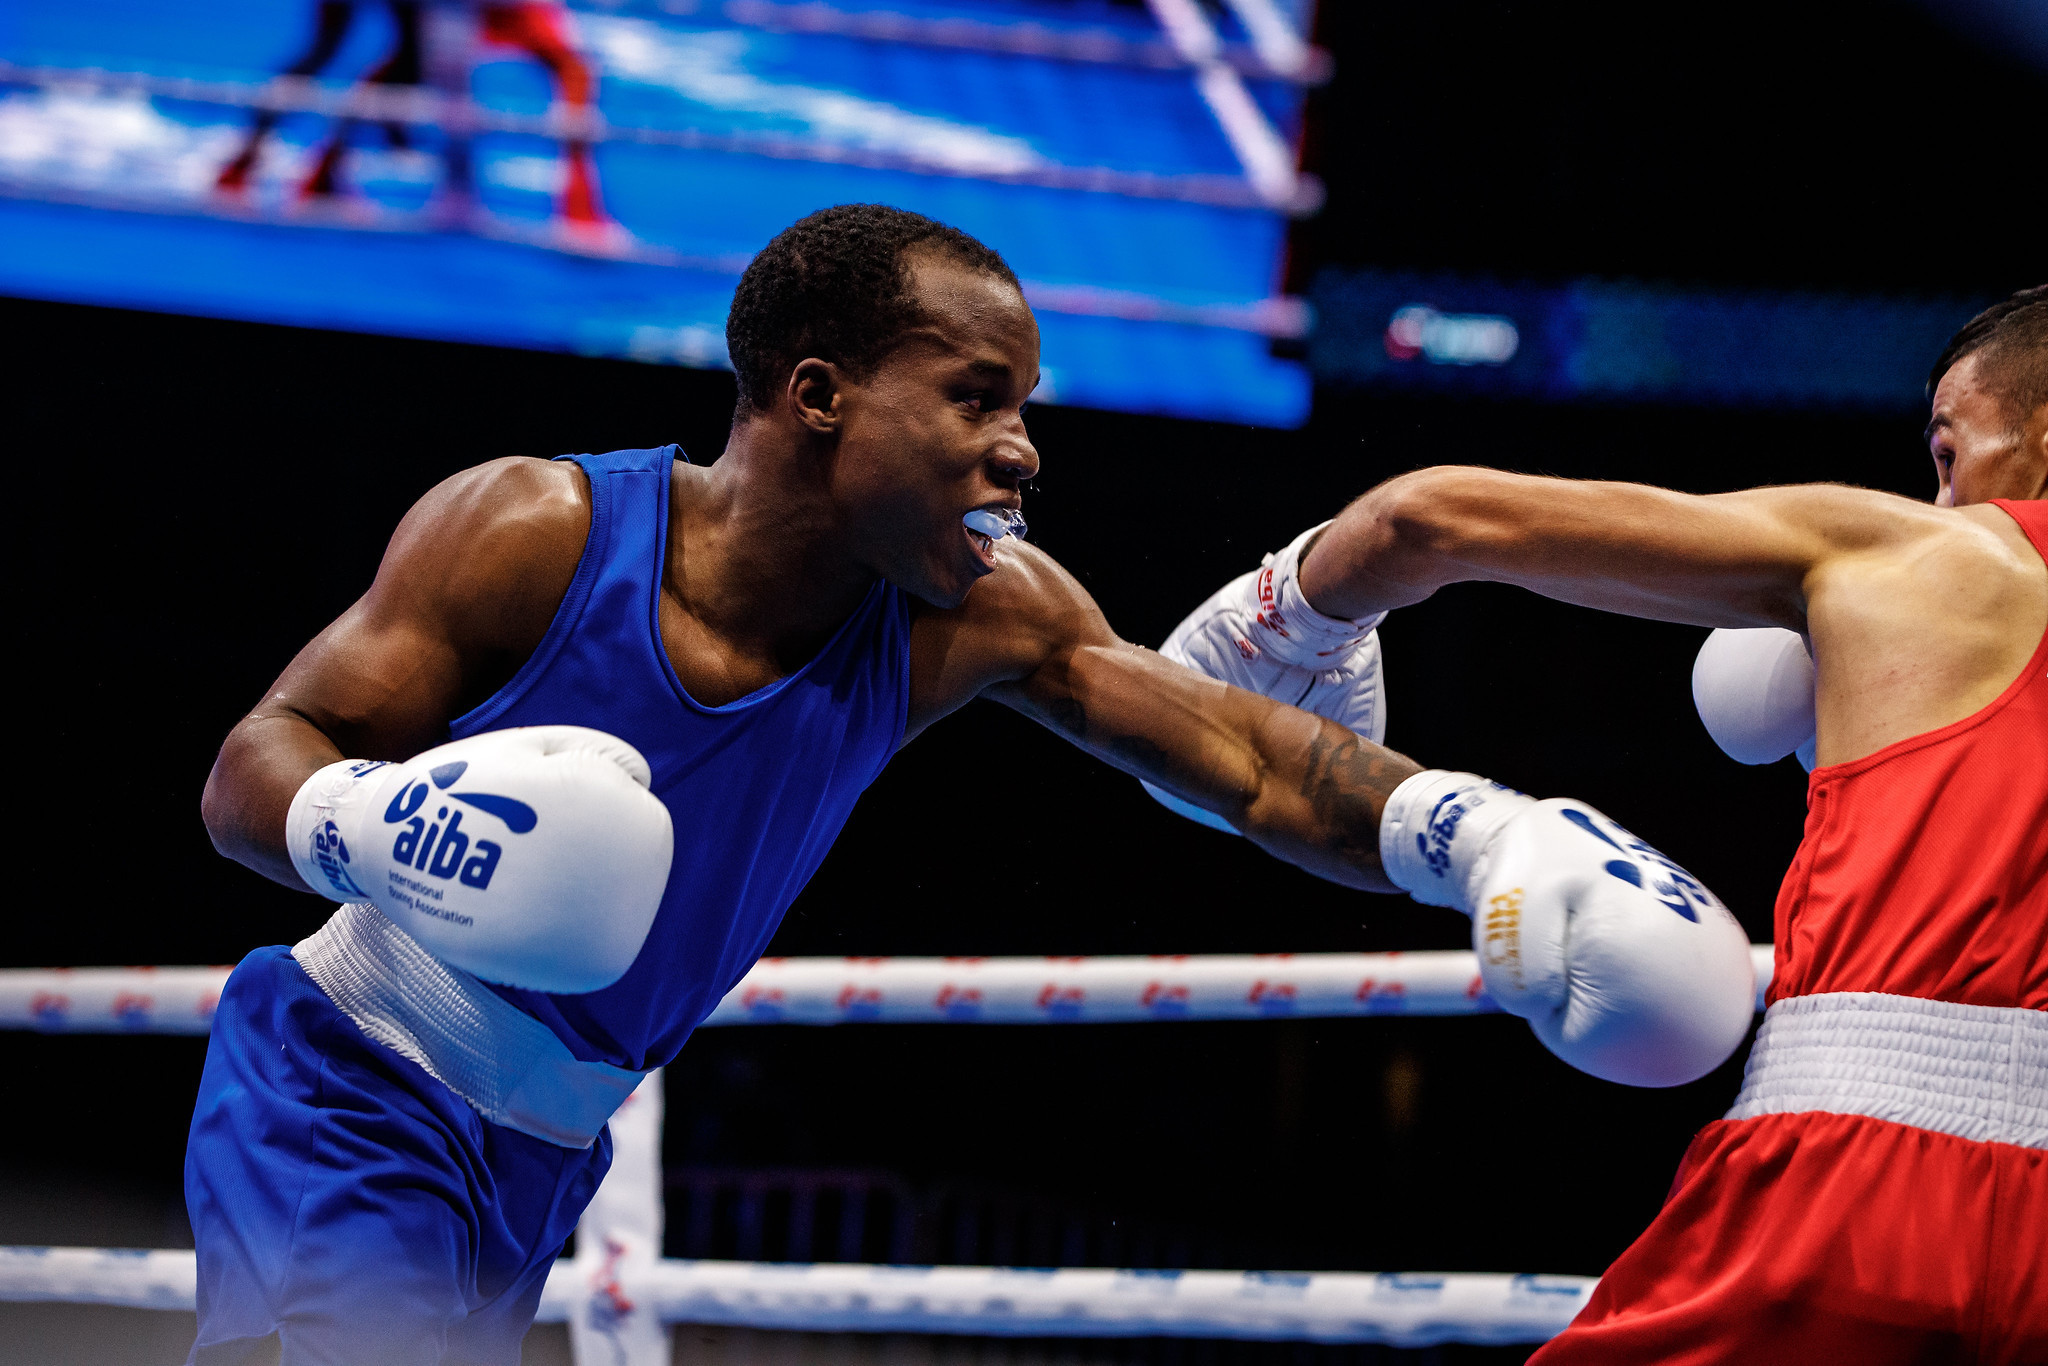 Barbados' Breedy confident of gold at AIBA Men's World Boxing Championships